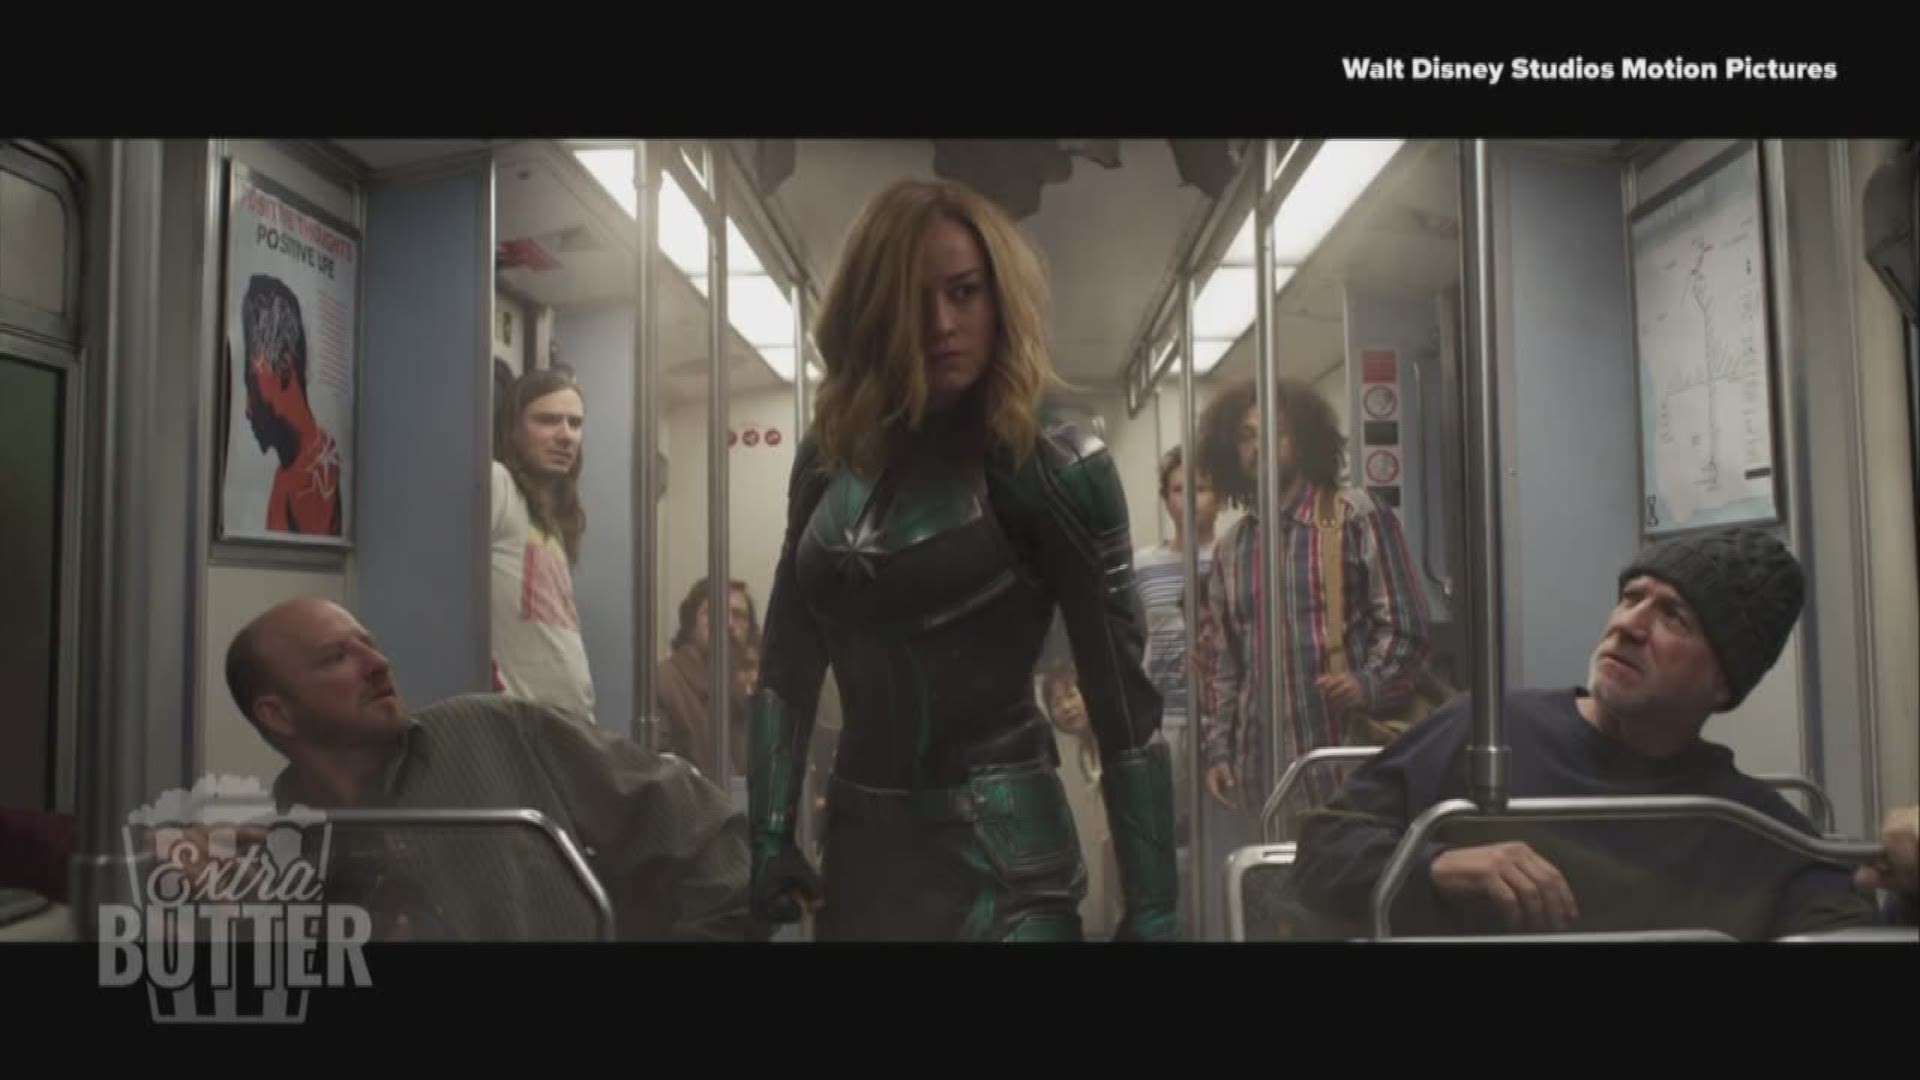 'Captain Marvel' is a big winner at the box office. Extra Butter talks about what they liked about the movie. Hear from stars Brie Larson and Samuel L. Jackson. Interviews provided by Walt Disney Studios Motion Pictures.